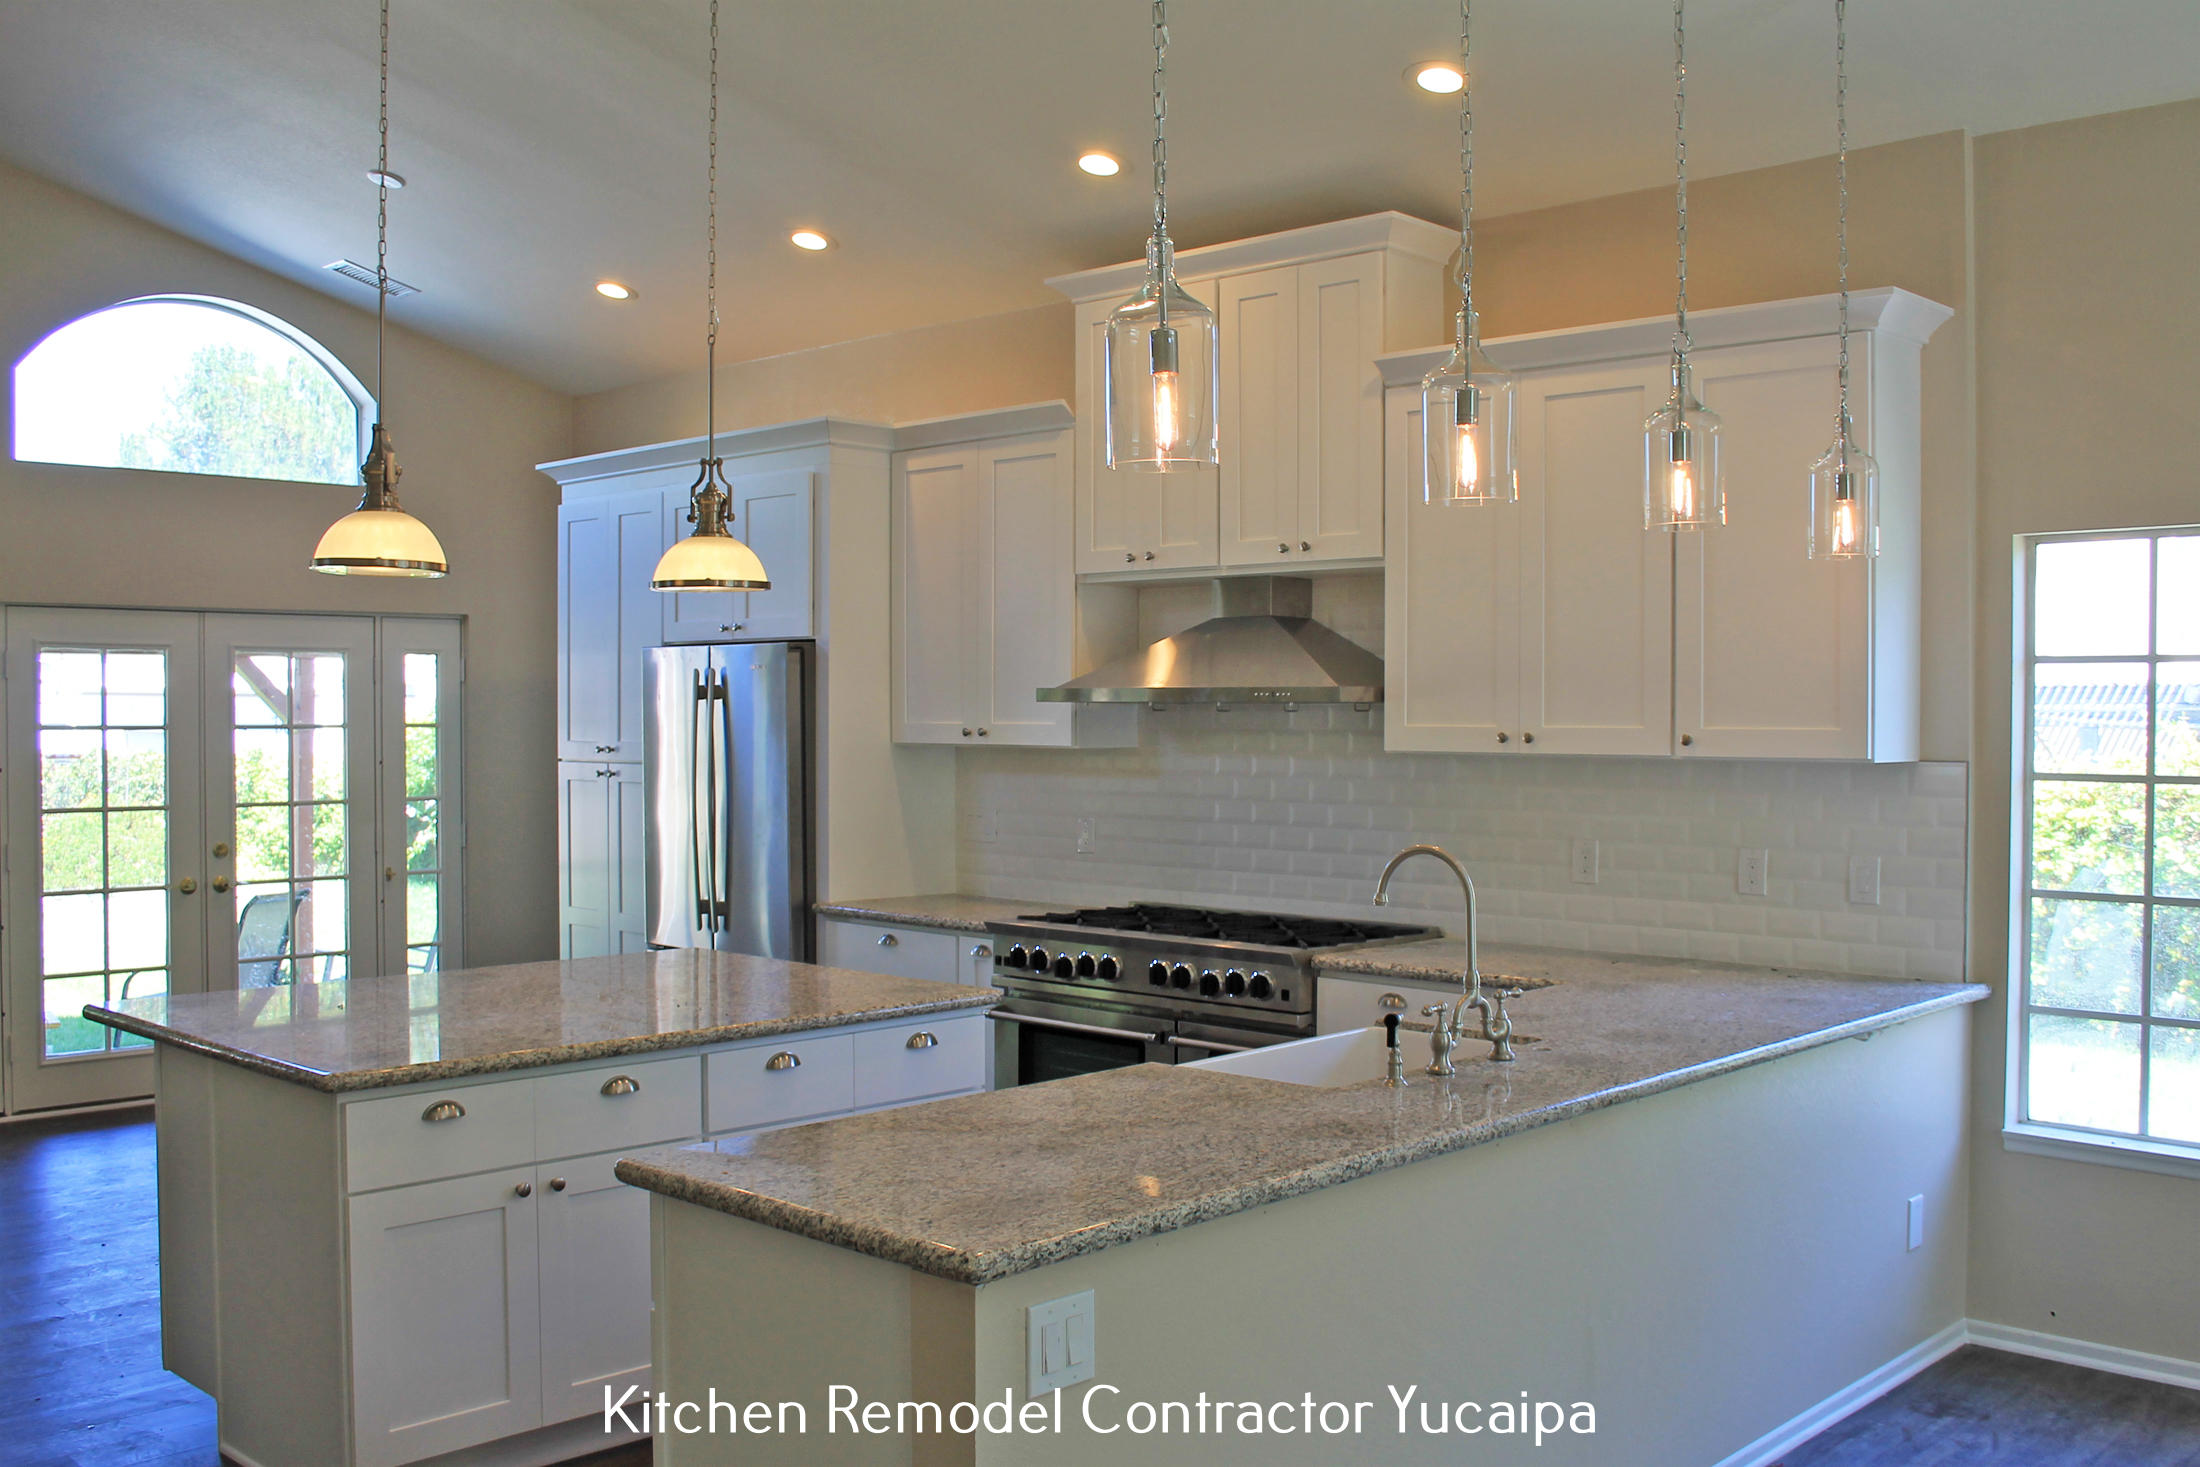 Construction Station Flooring and Design Shares Money-Saving Tips for Kitchen Remodeling Projects